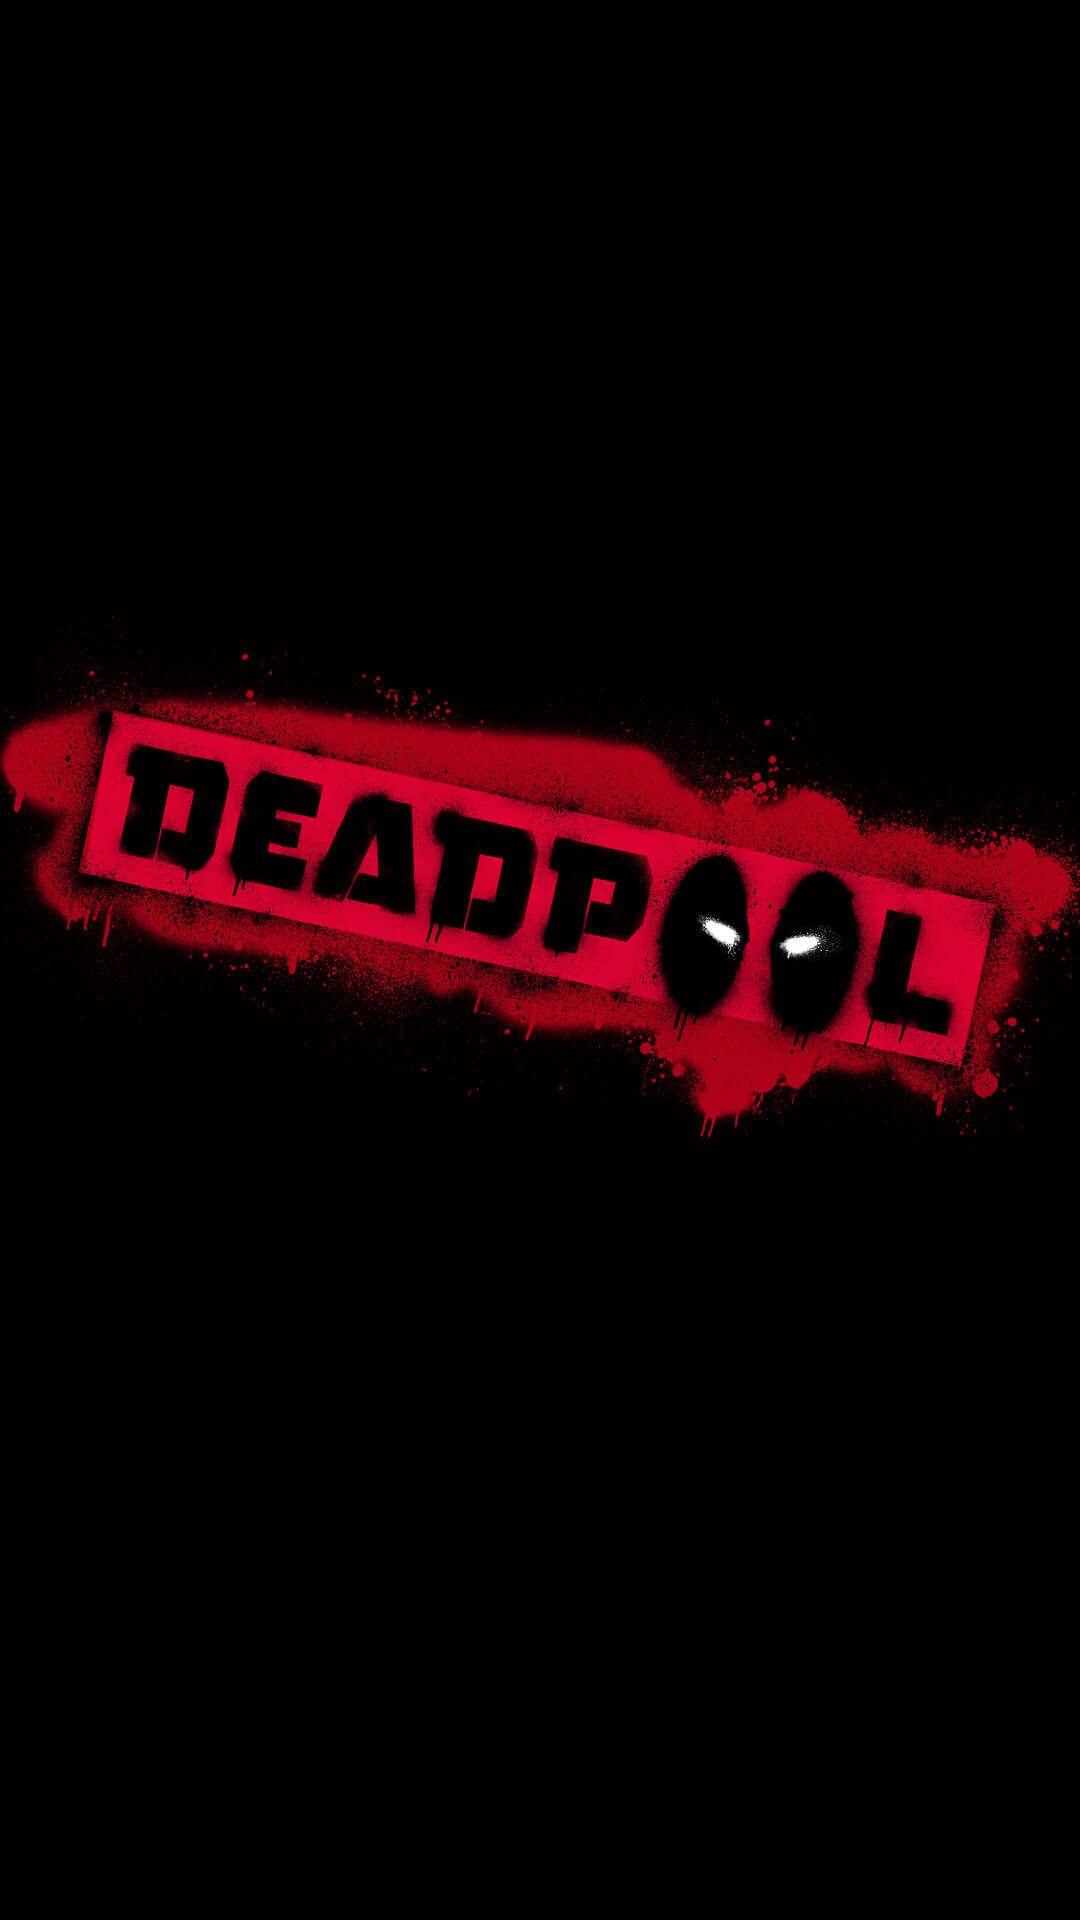 Deadpool Logo iPhone 6 Wallpaper HD. All Marvel, DC&Other